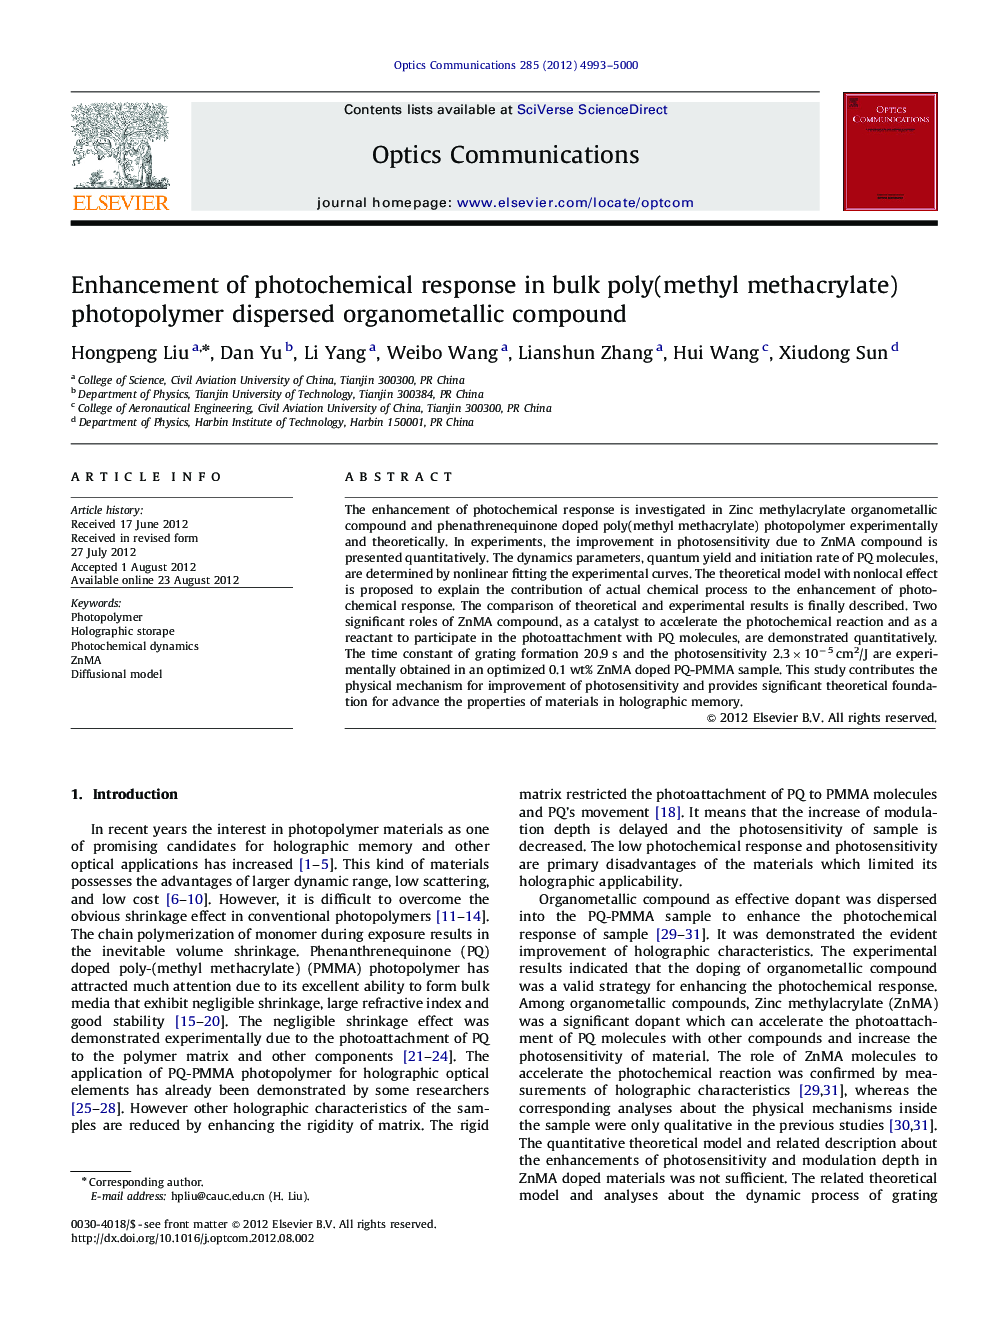 Enhancement of photochemical response in bulk poly(methyl methacrylate) photopolymer dispersed organometallic compound